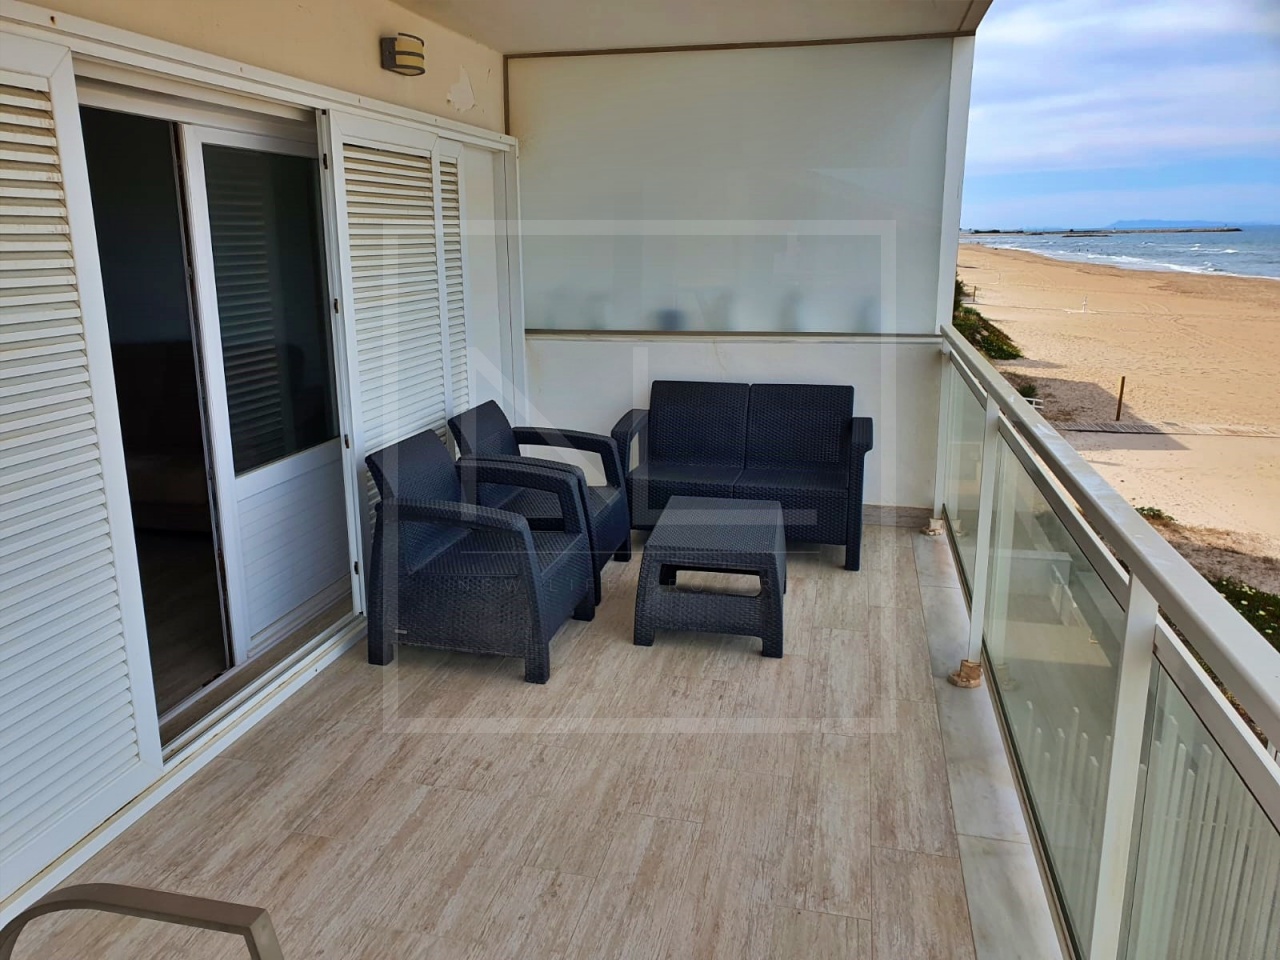 3 bedroom 2 bathroom penthouse apartment For Sale in Oliva